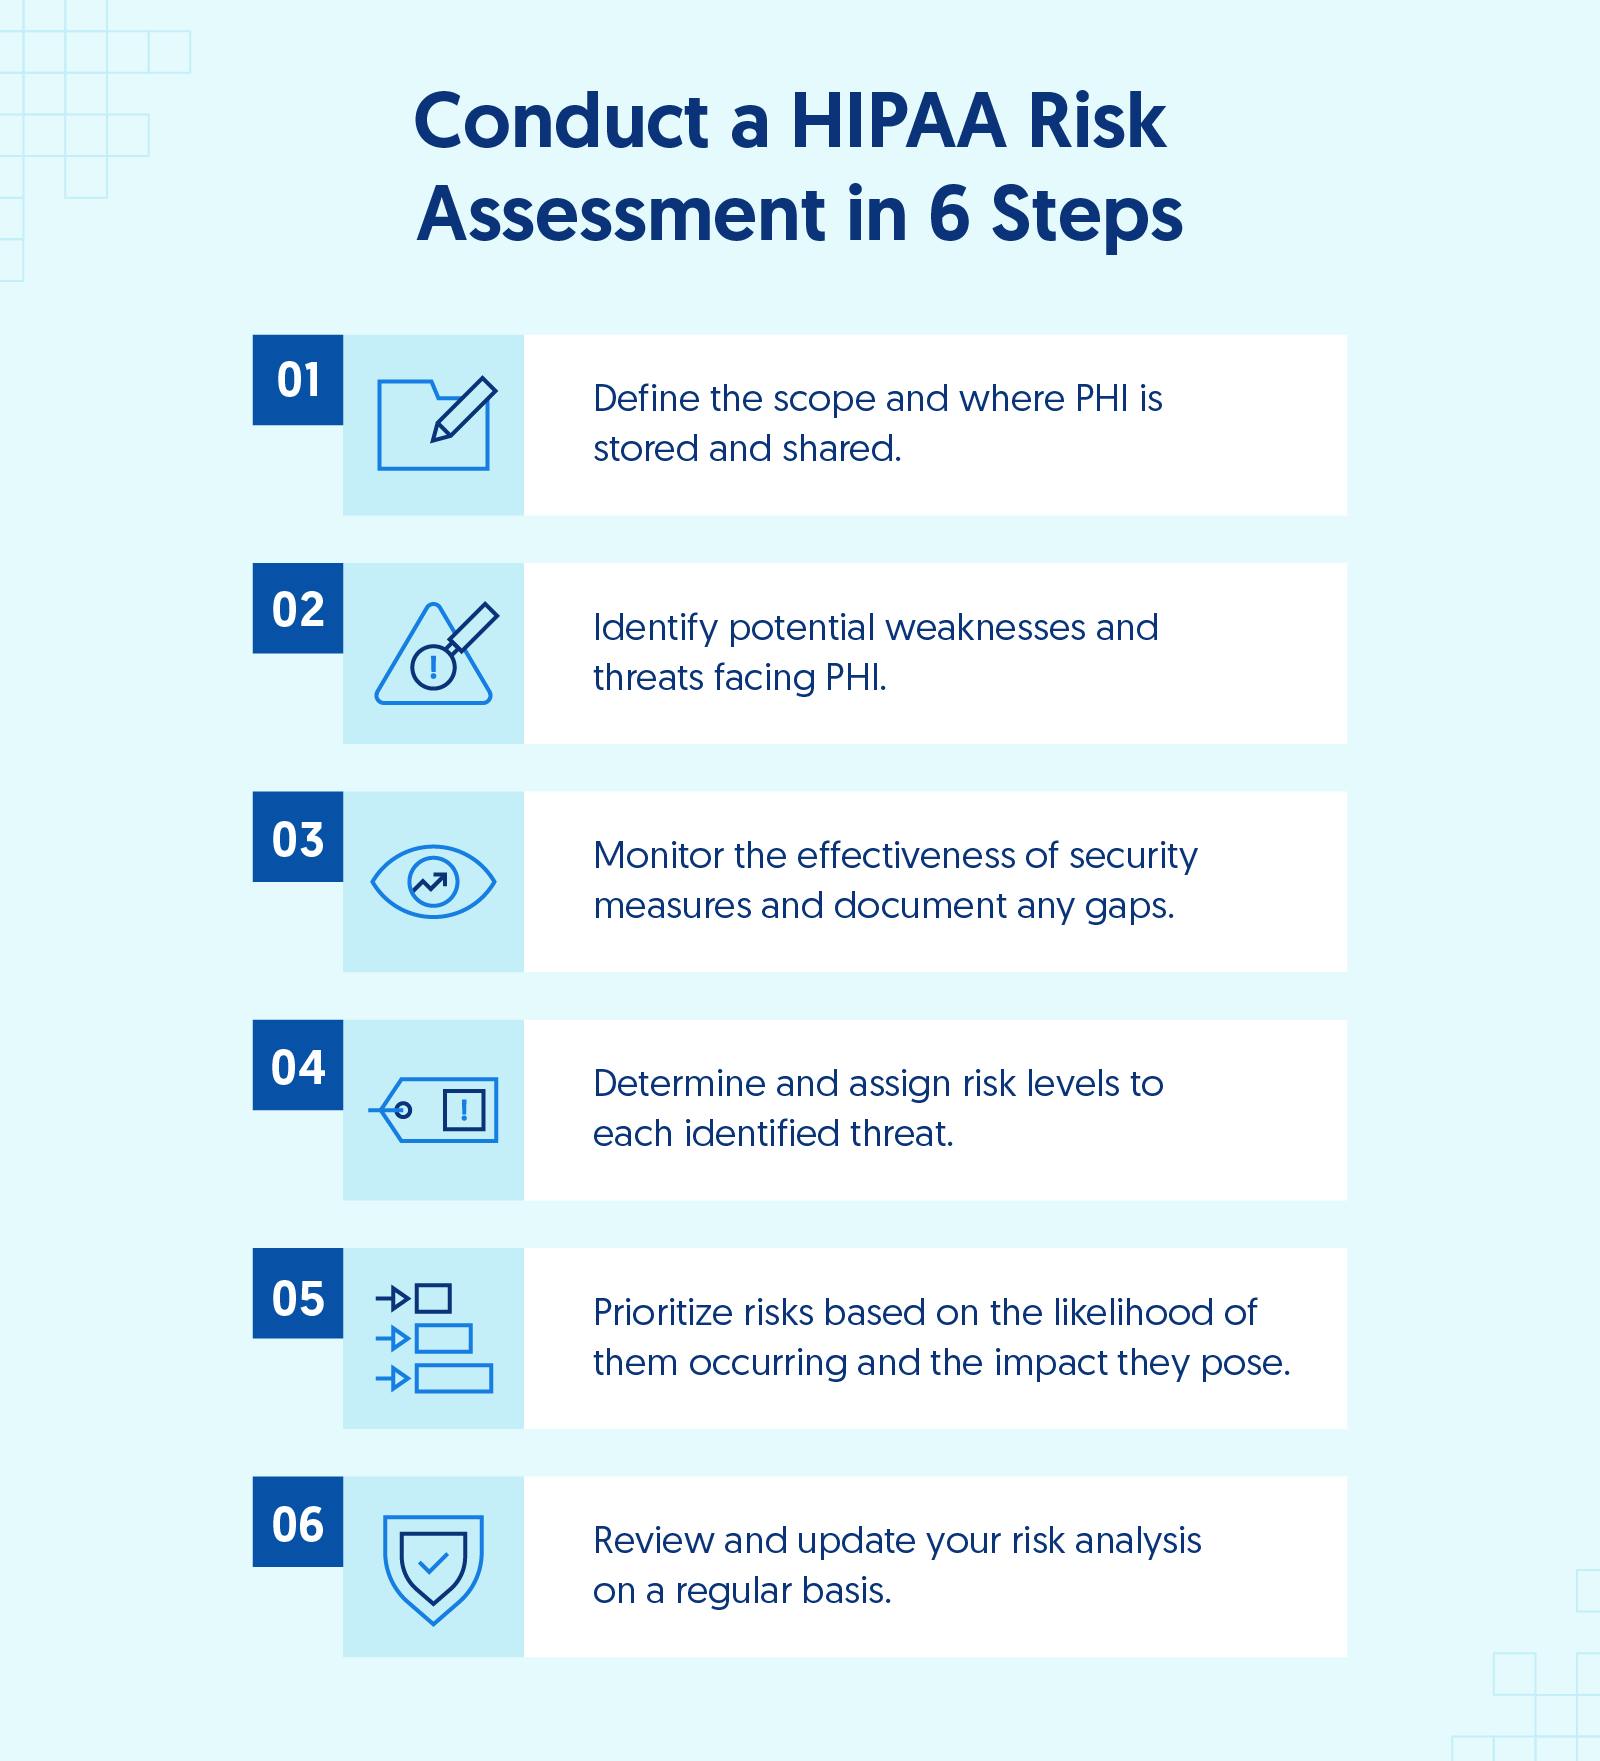 How To Conduct a HIPAA Risk Assessment in 6 Steps   Checklist